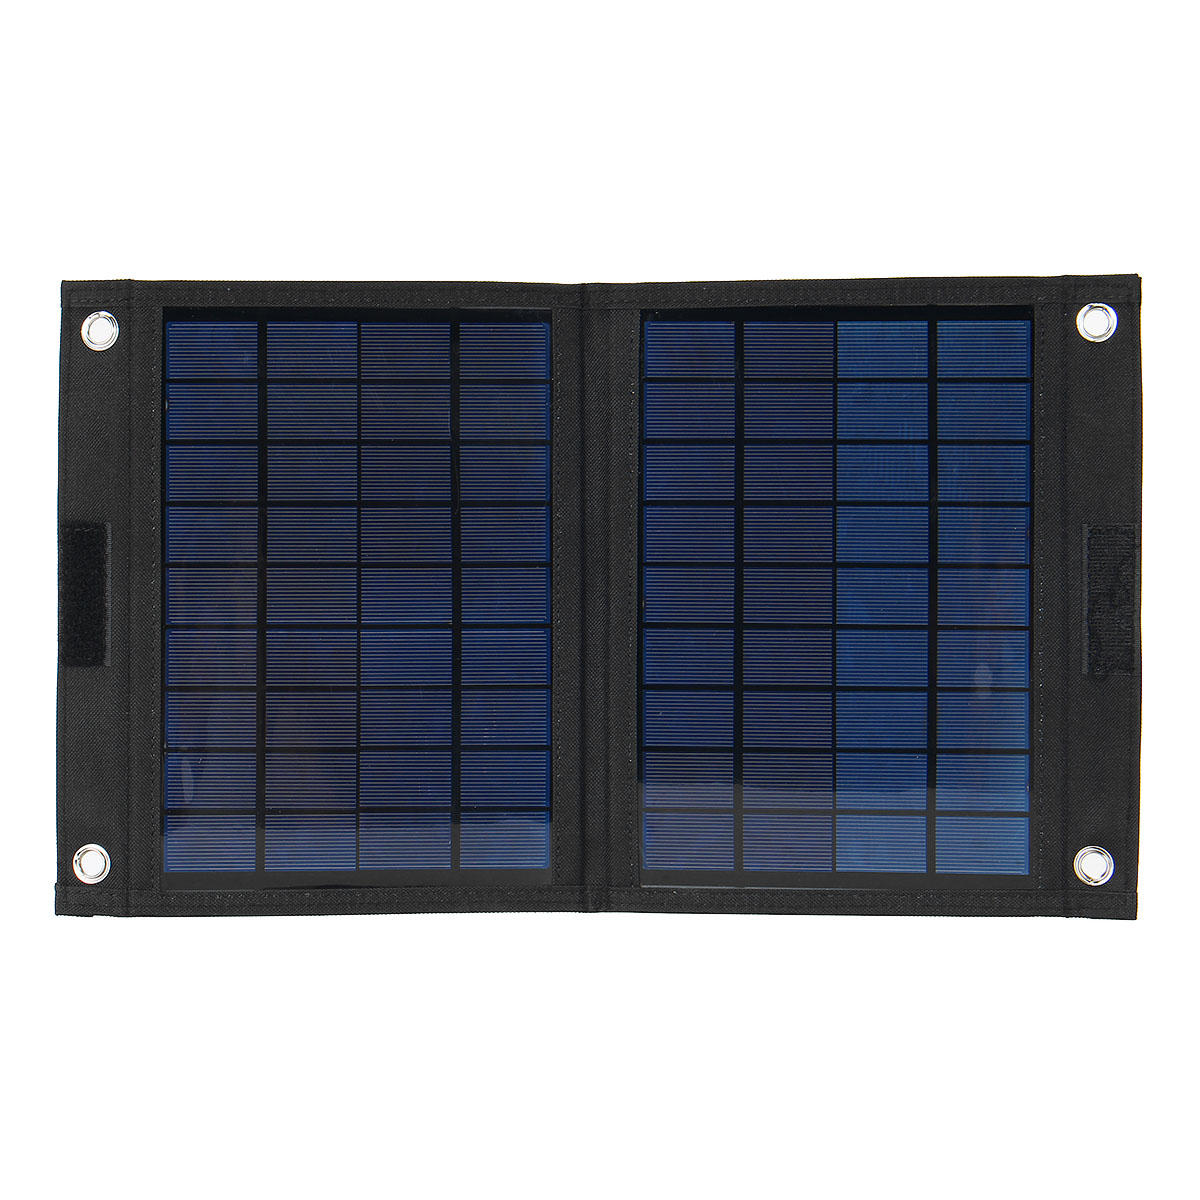 Image of Sunpower 50W 18V Foldable Solar Panel Charger Solar Power Bank for Camping Hiking USB Backpacking Power Supply